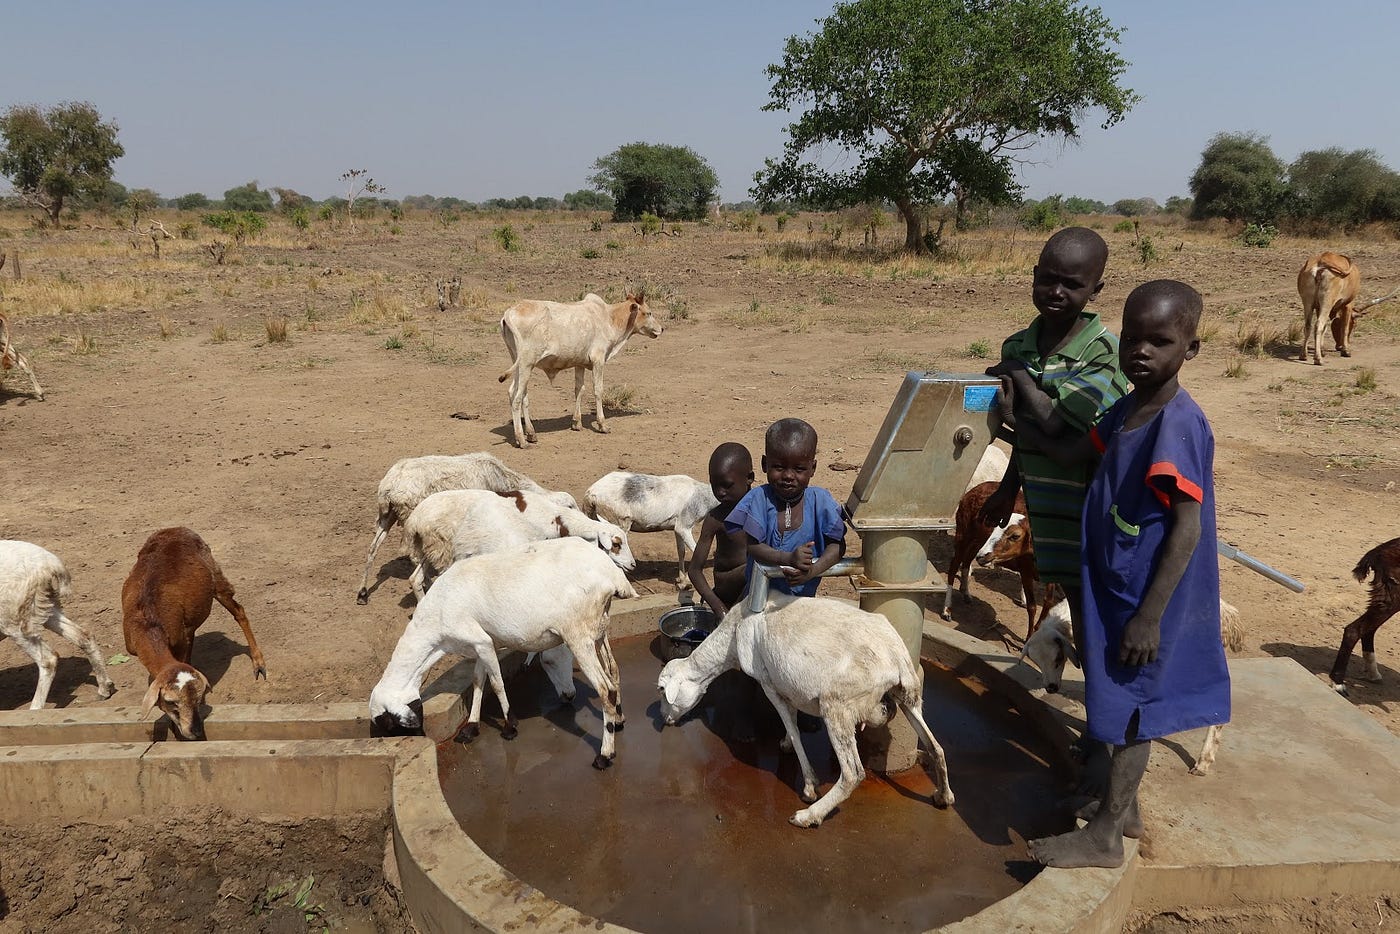 Children at the Rainmaker well in Tonj, South Sudan.